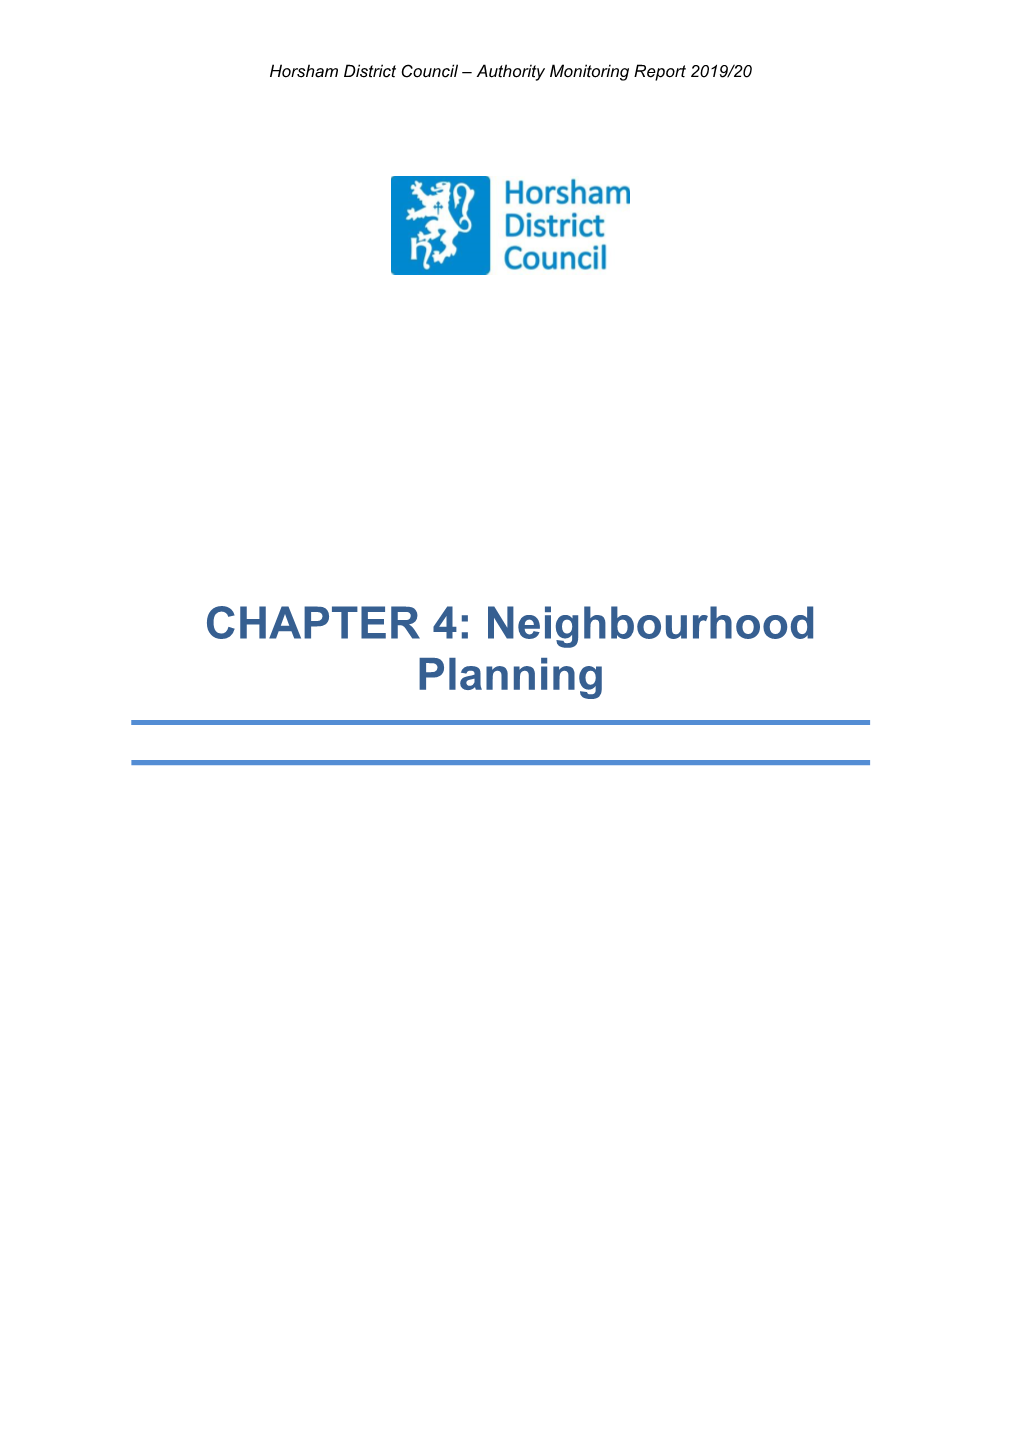 Neighbourhood Planning Horsham District Council – Authority Monitoring Report 2019/20